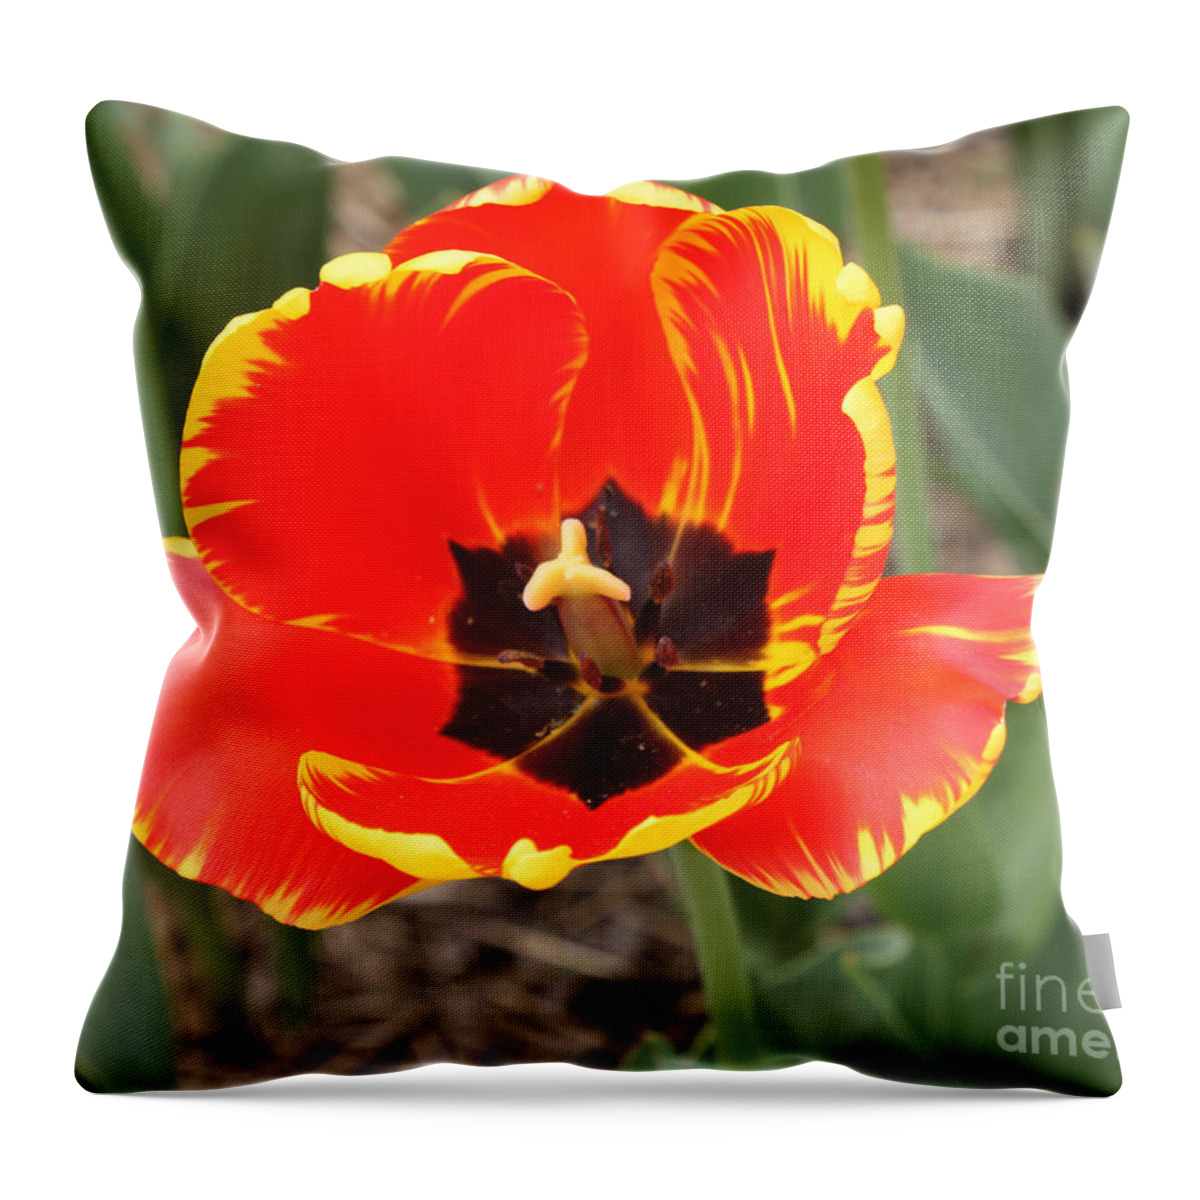 Red Tulip At Brooklyn Botanical Gardens Throw Pillow featuring the photograph Red Tulip At Brooklyn Botanical Gardens by John Telfer